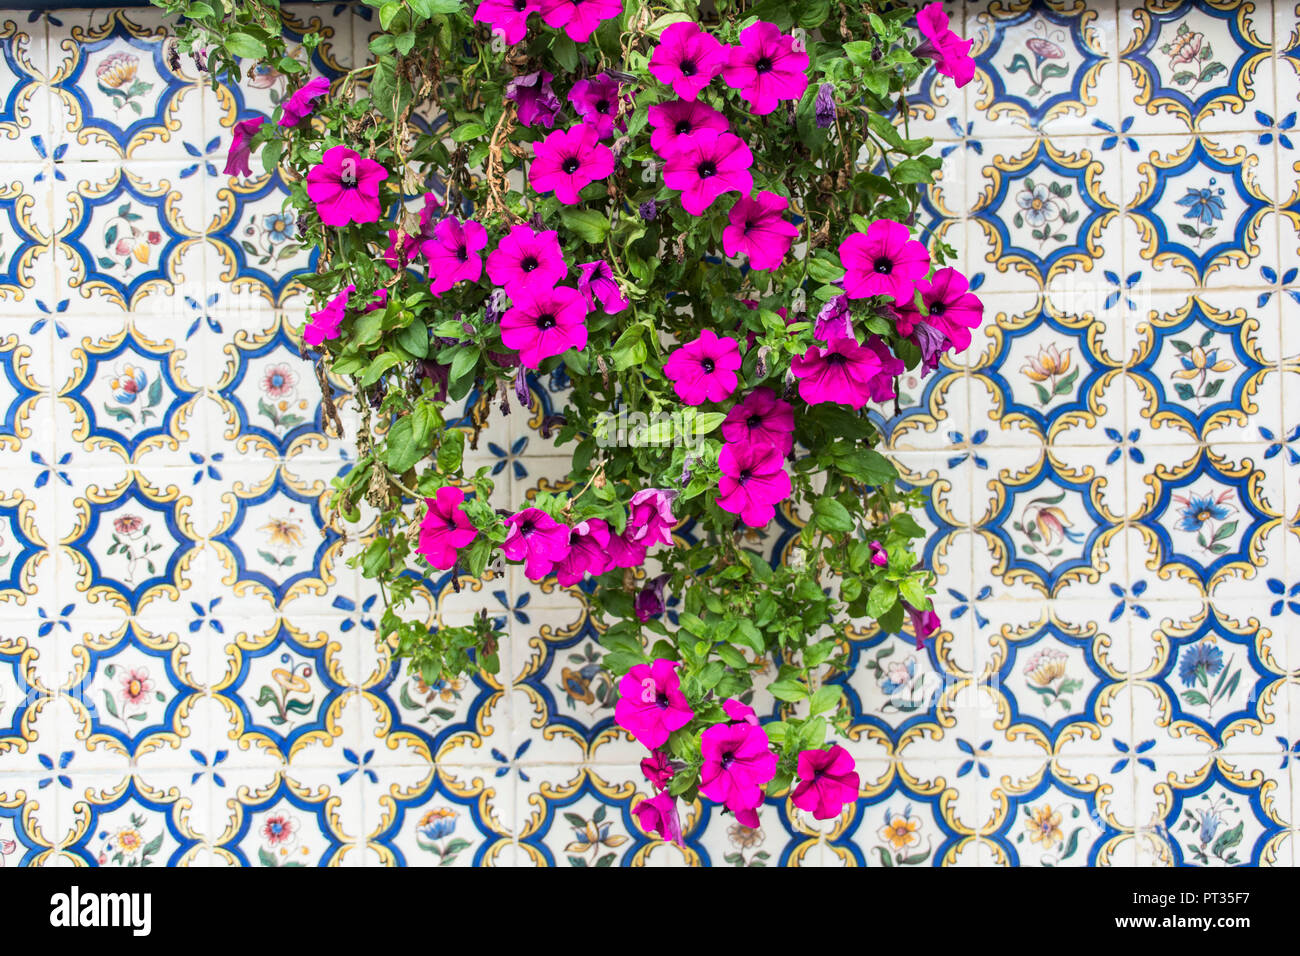 Hanging petunias in front of a tile wall on Azores island Terceira Stock Photo